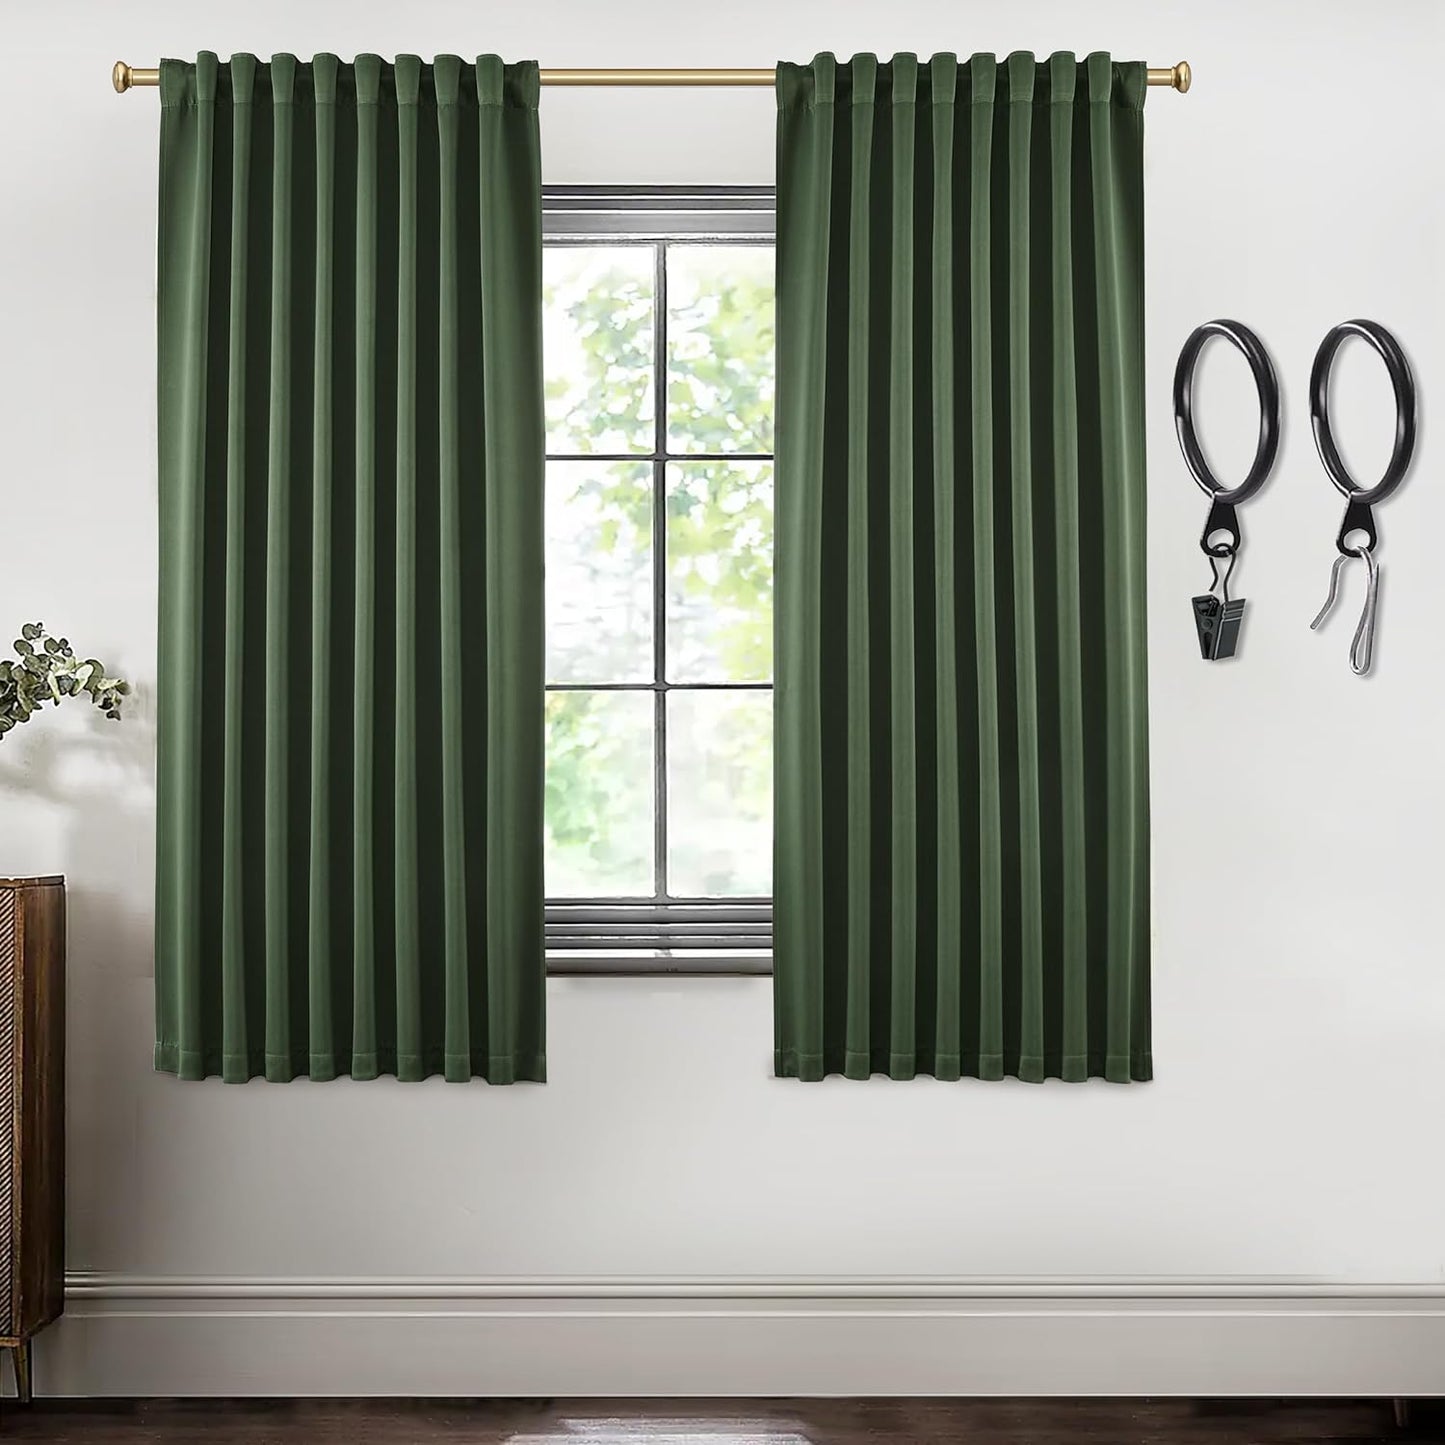 SHINELAND Beige Room Darkening Curtains 105 Inches Long for Living Room Bedroom,Cortinas Para Cuarto Bloqueador De Luz,Thermal Insulated Back Tab Pleat Blackout Curtains for Sunroom Patio Door Indoor  SHINELAND Olive Green 2X(52"Wx63"L) 